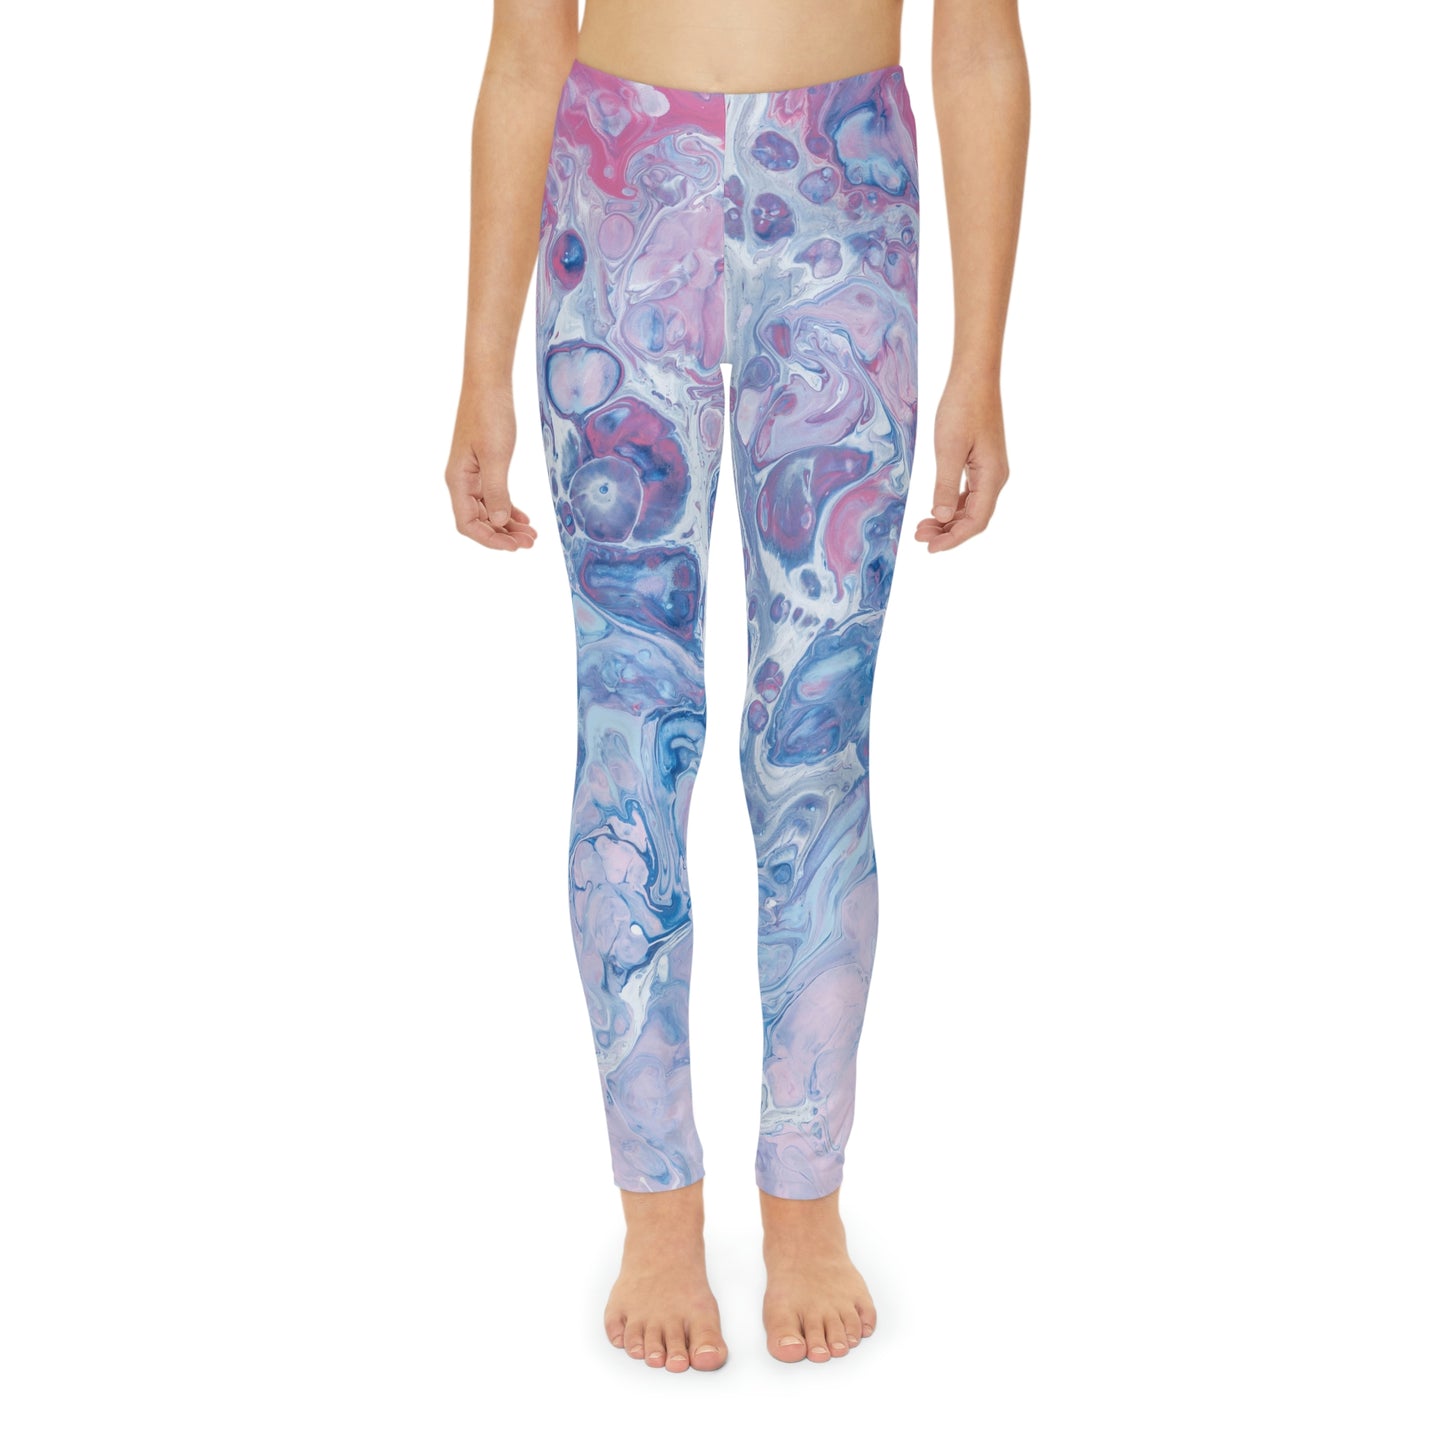 Marble Youth Leggings, One of a Kind Gift - Unique Workout Activewear tights for kids , Daughter, Niece Christmas Gift